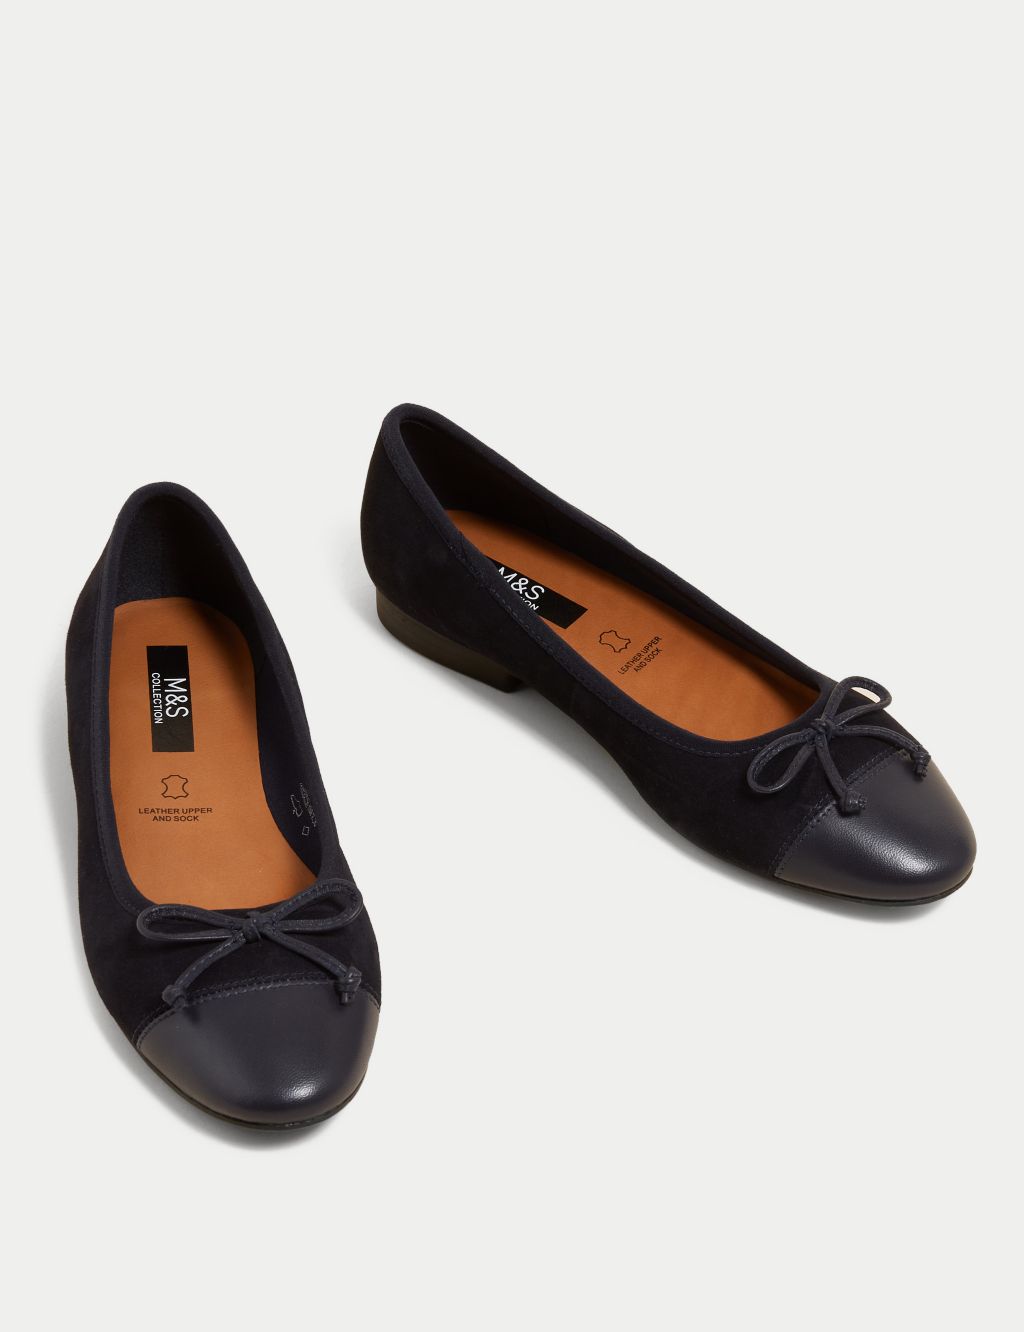 Suede Stain Resistant Ballet Pumps | M&S Collection | M&S